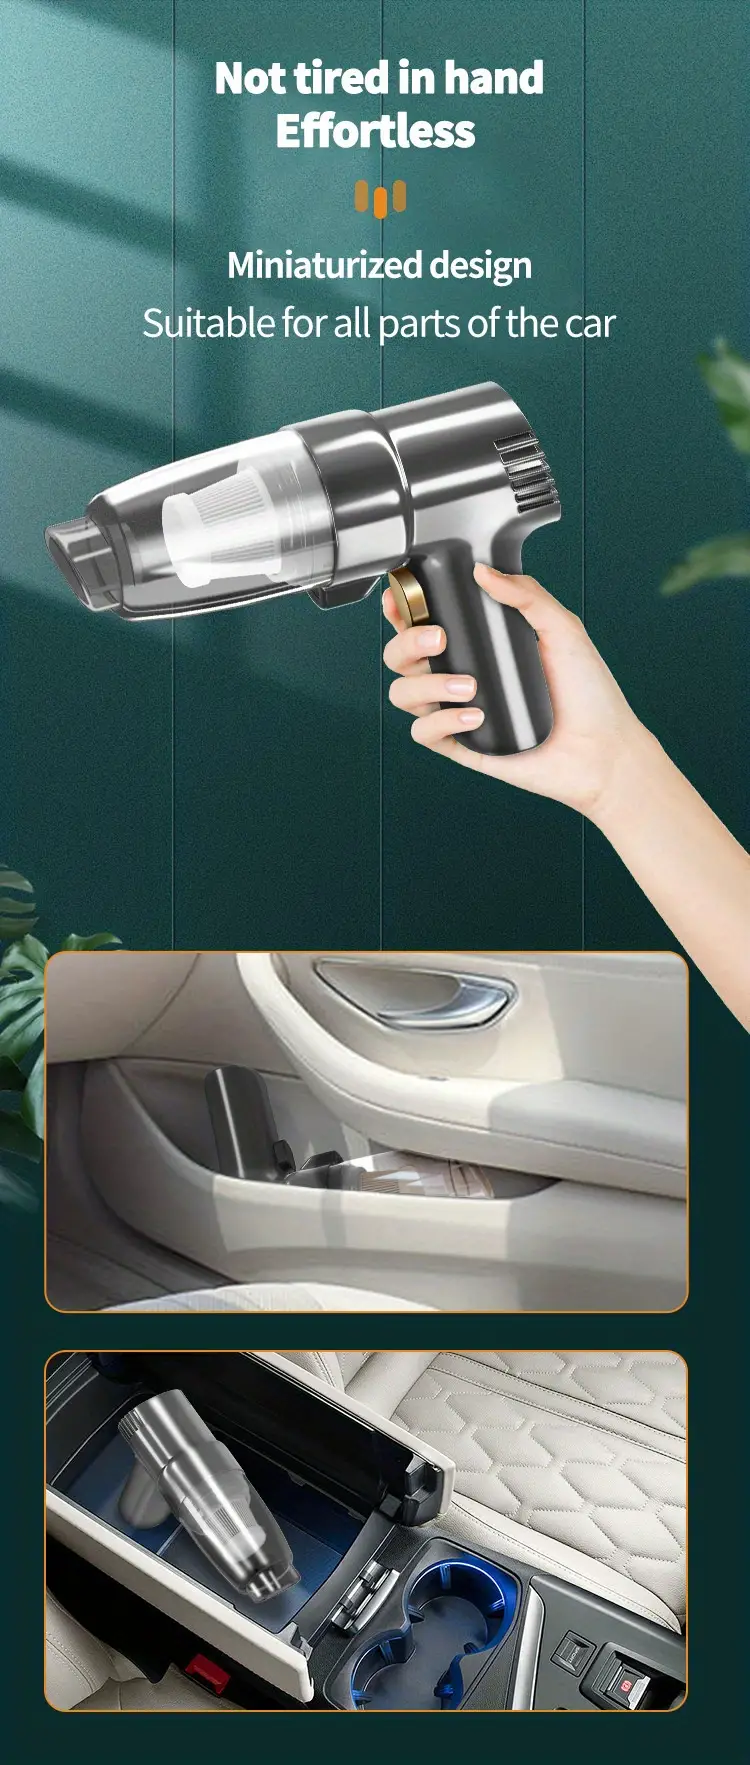 the on board vacuum cleaner ultra powerful high suction car multi scene uses the small mini hand held multi functional portable details 4